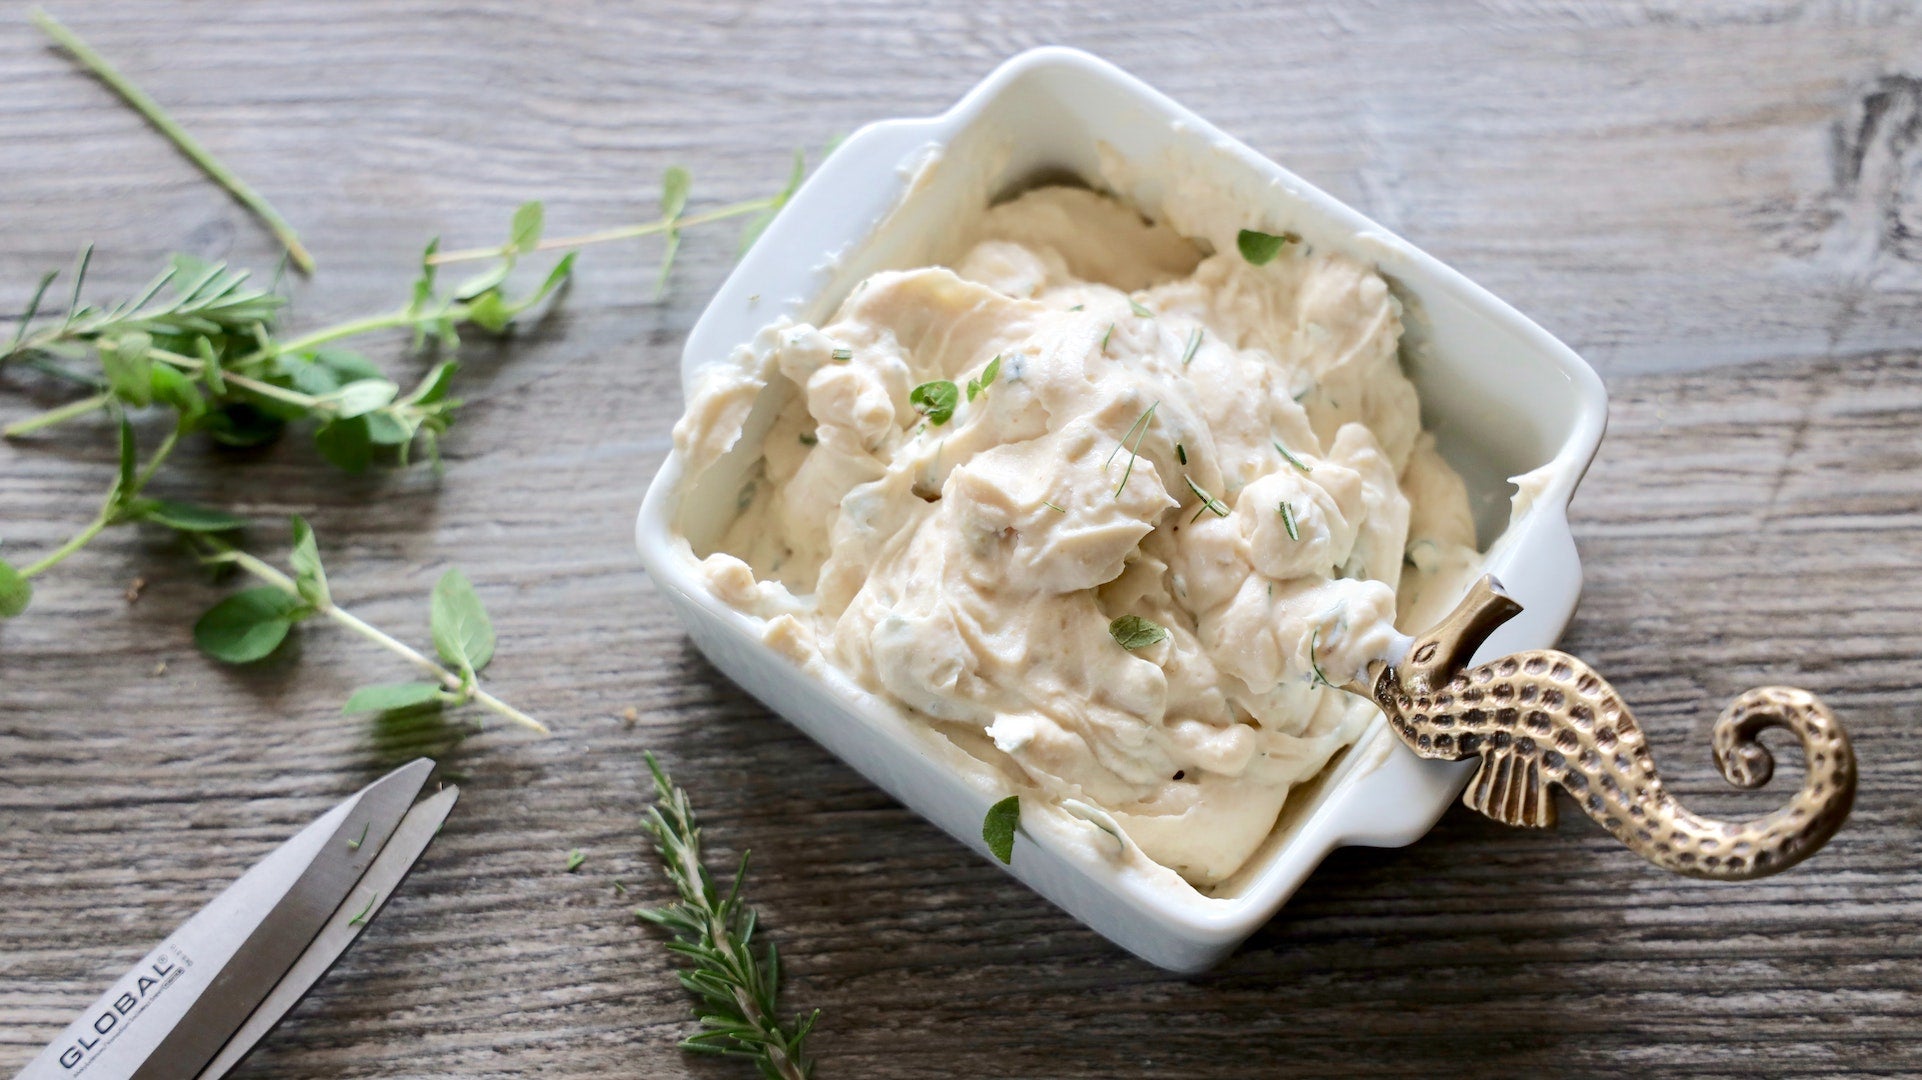 Image of LĒVO's recipe for roasted garlic mashed potatoes.